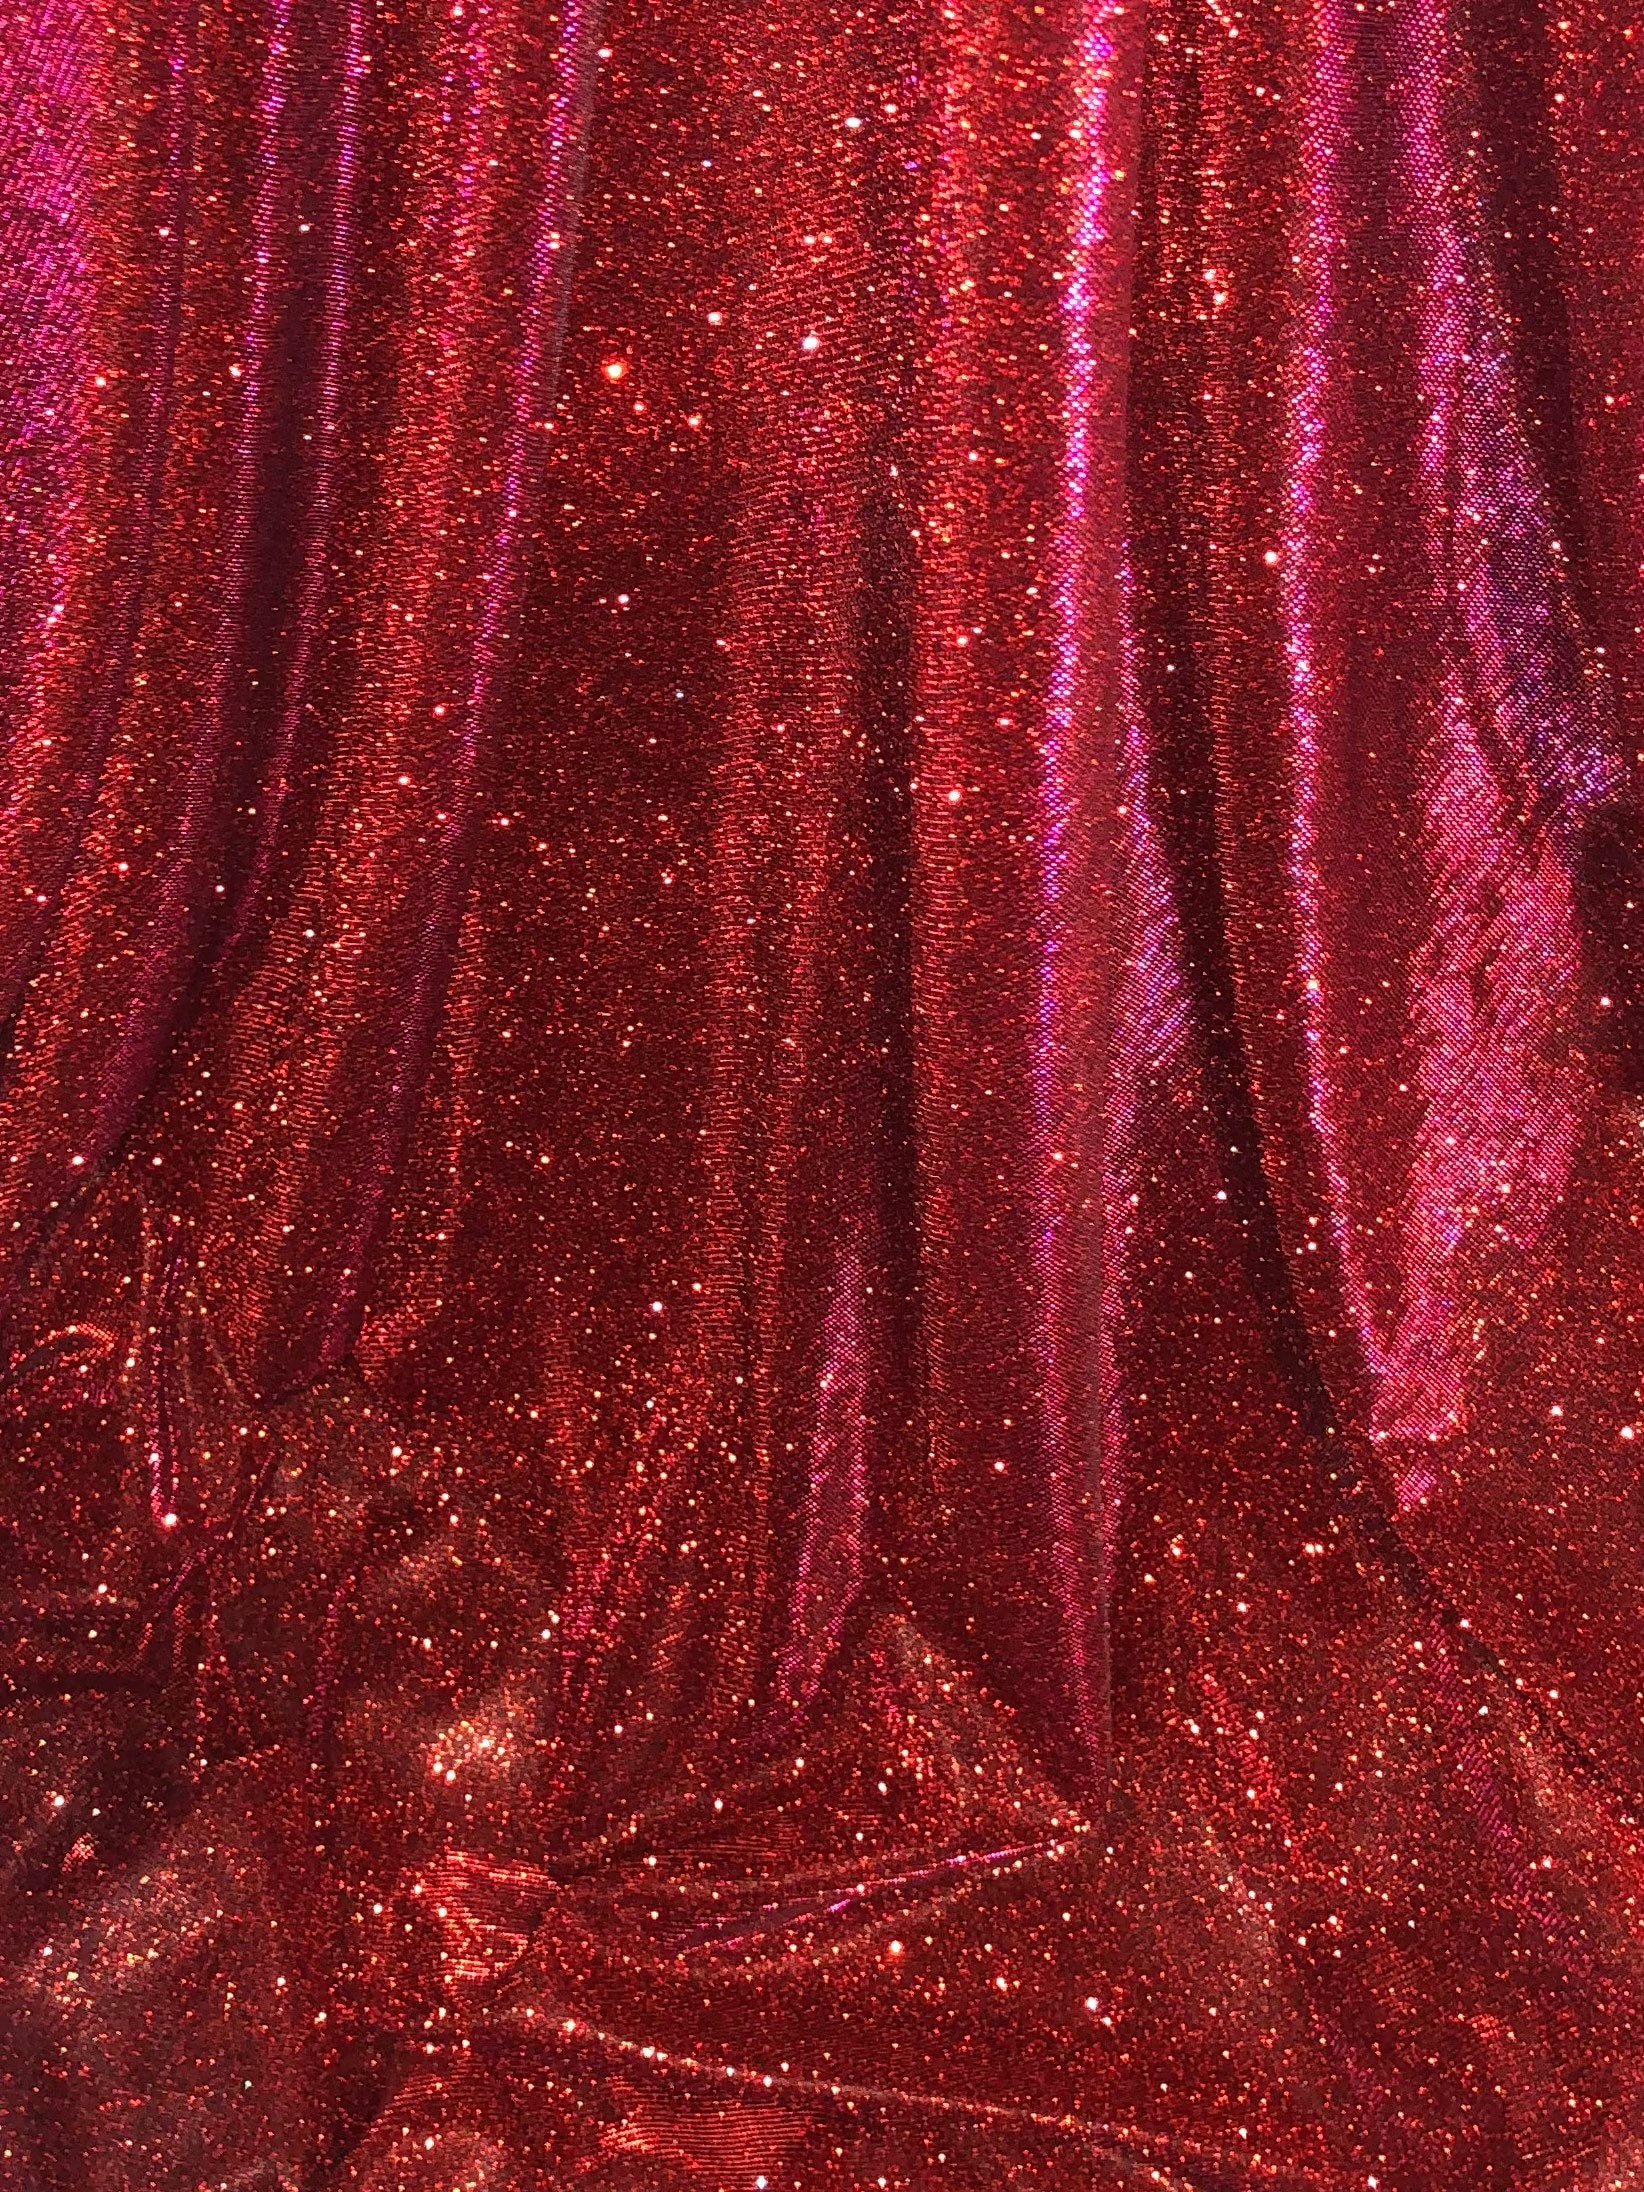 Red Sequin Fabric - 3mm Sequin Sparkly Costume Craft Fabric